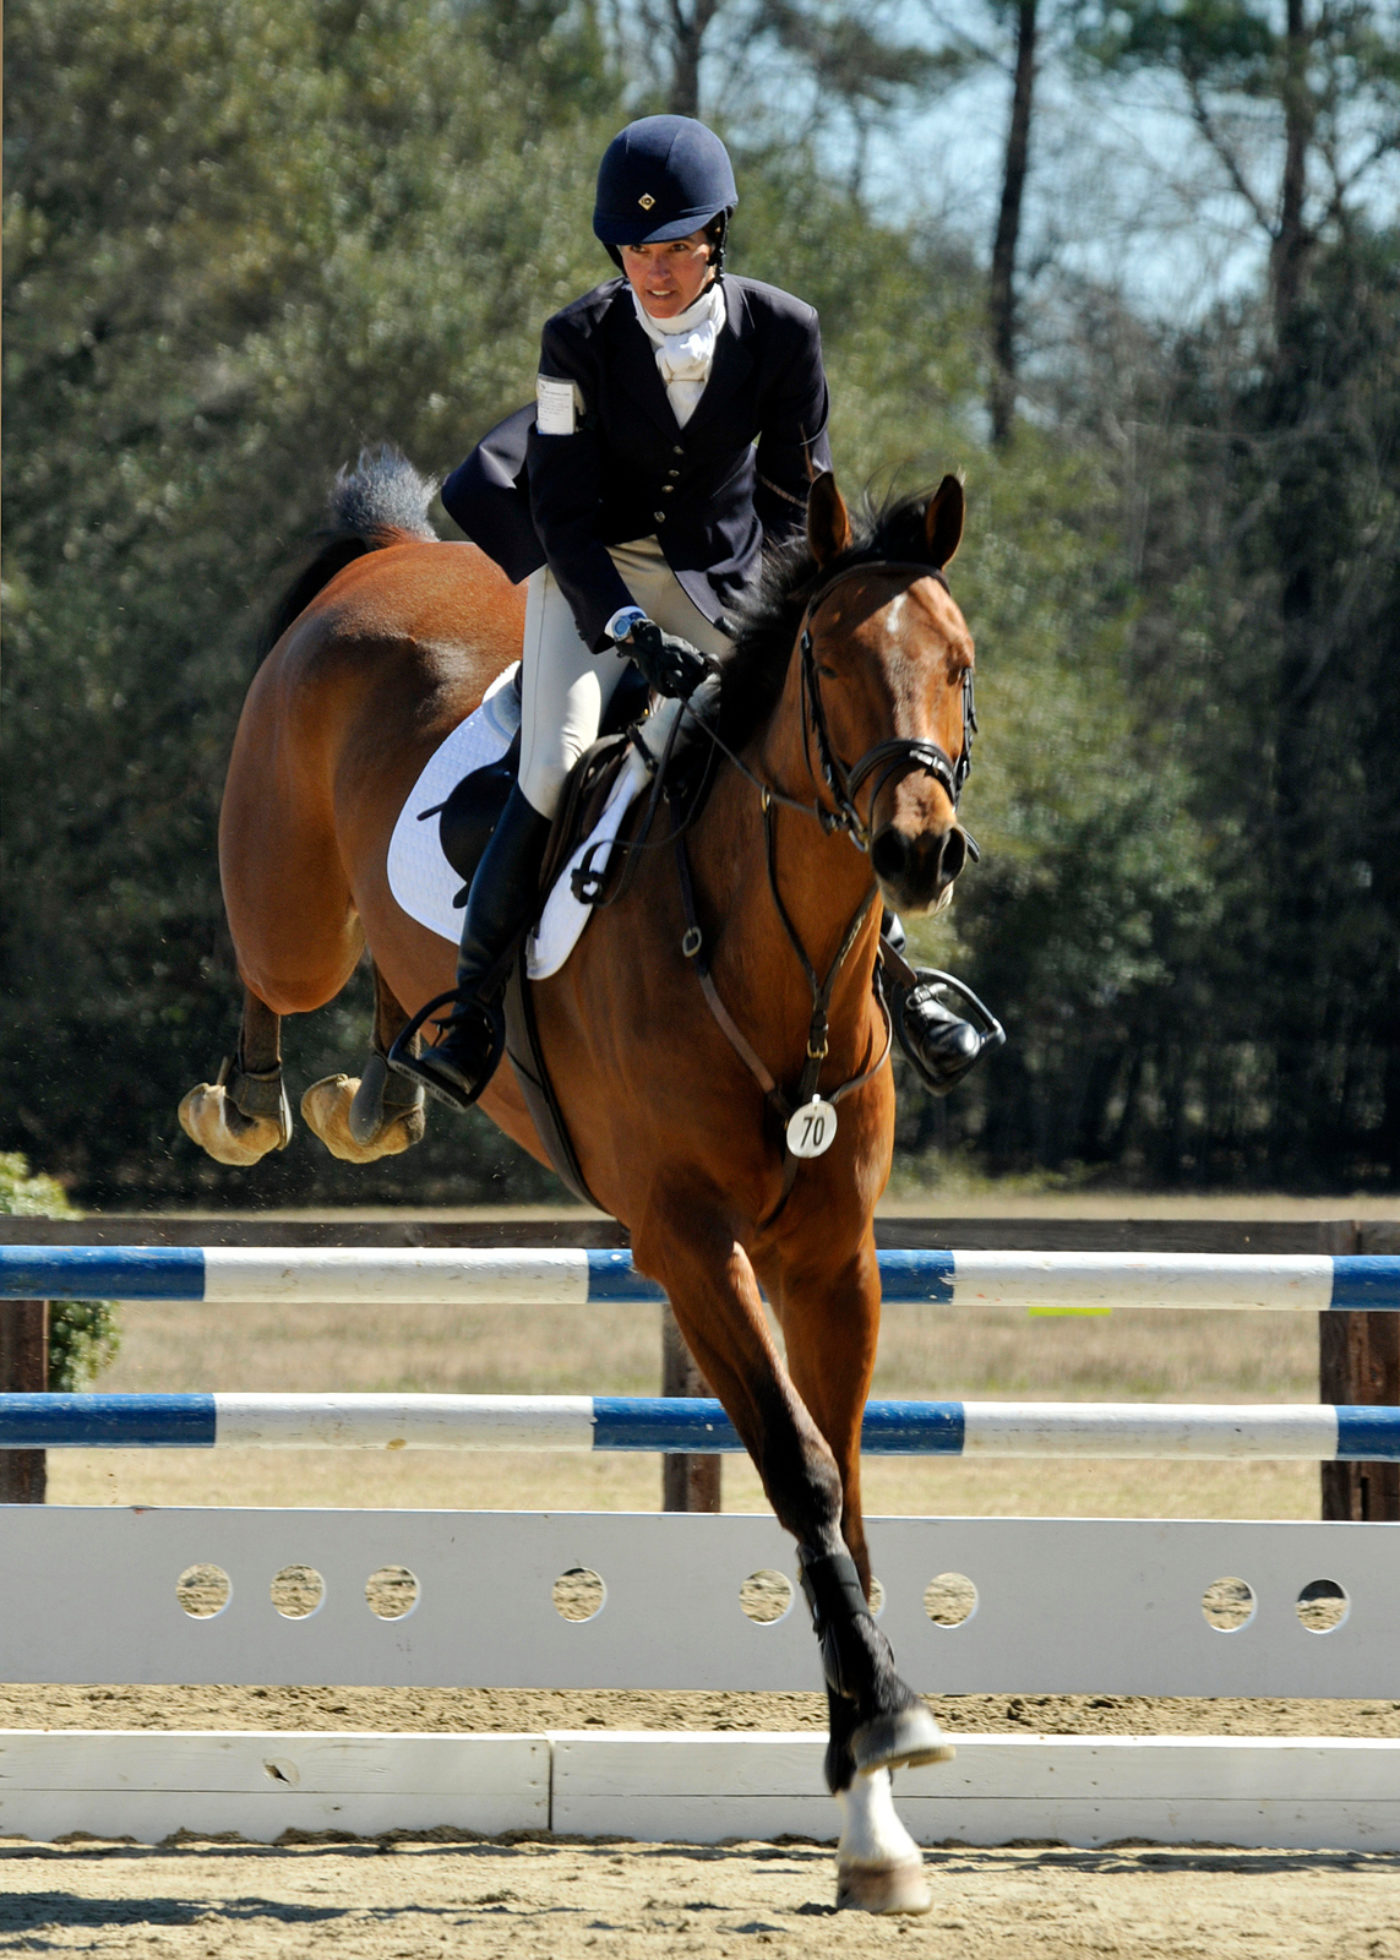 Tamra Smith and En Vogue, leaders of the Galway Downs International CCI4*-L. USEA/Jessica Duffy Photo.